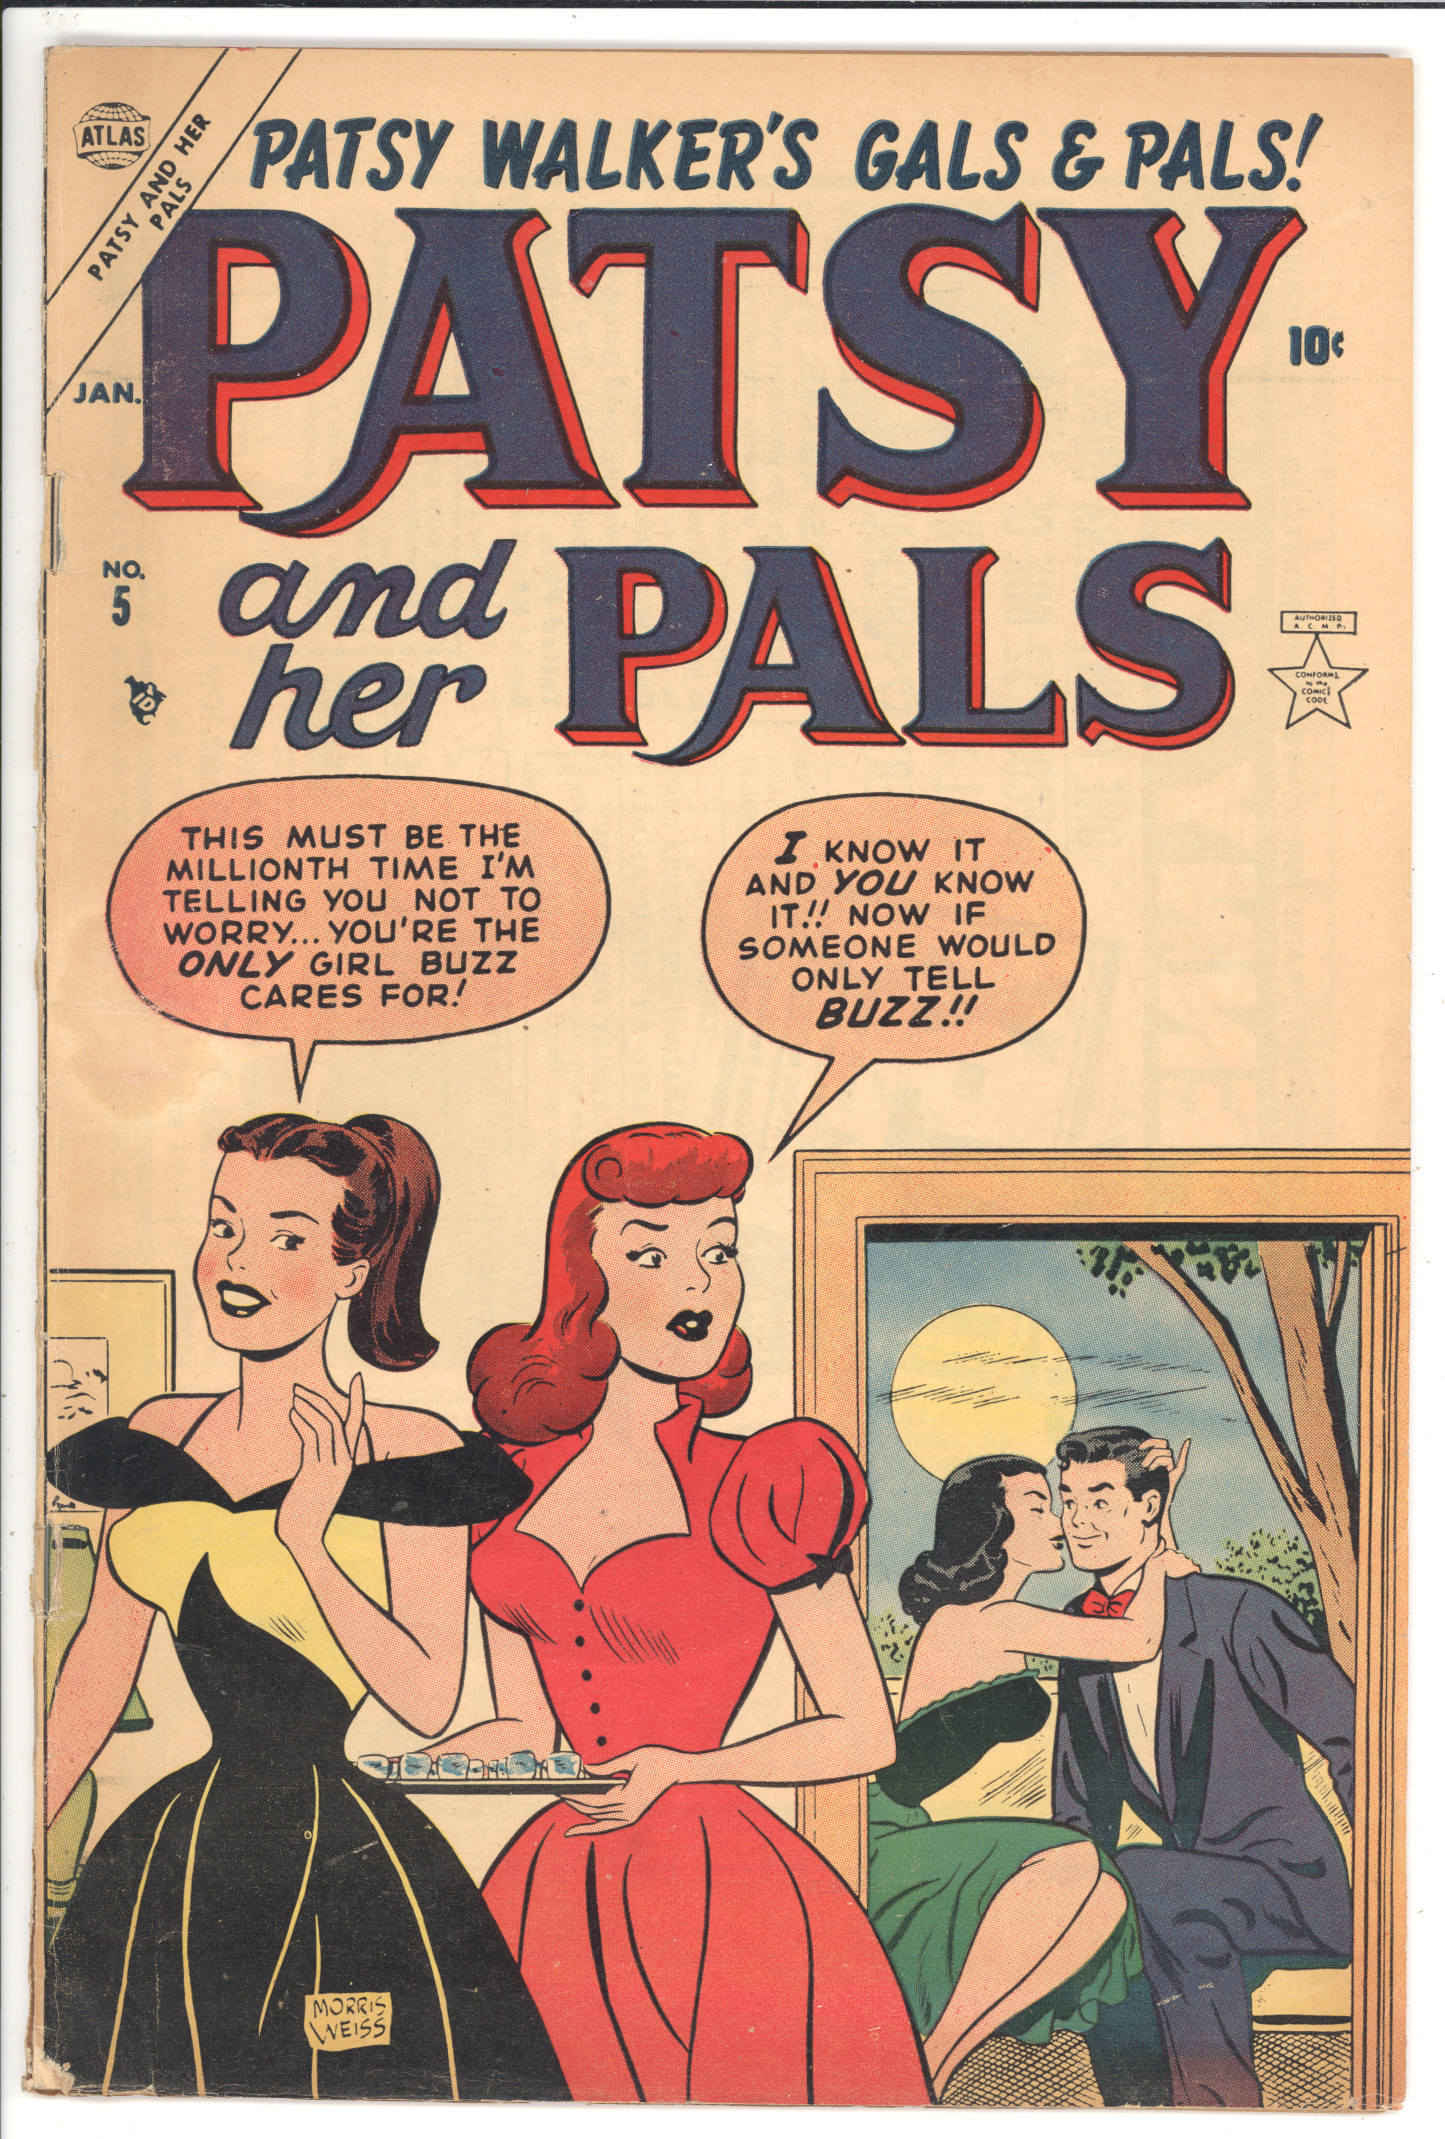 Patsy and her Pals #5 front